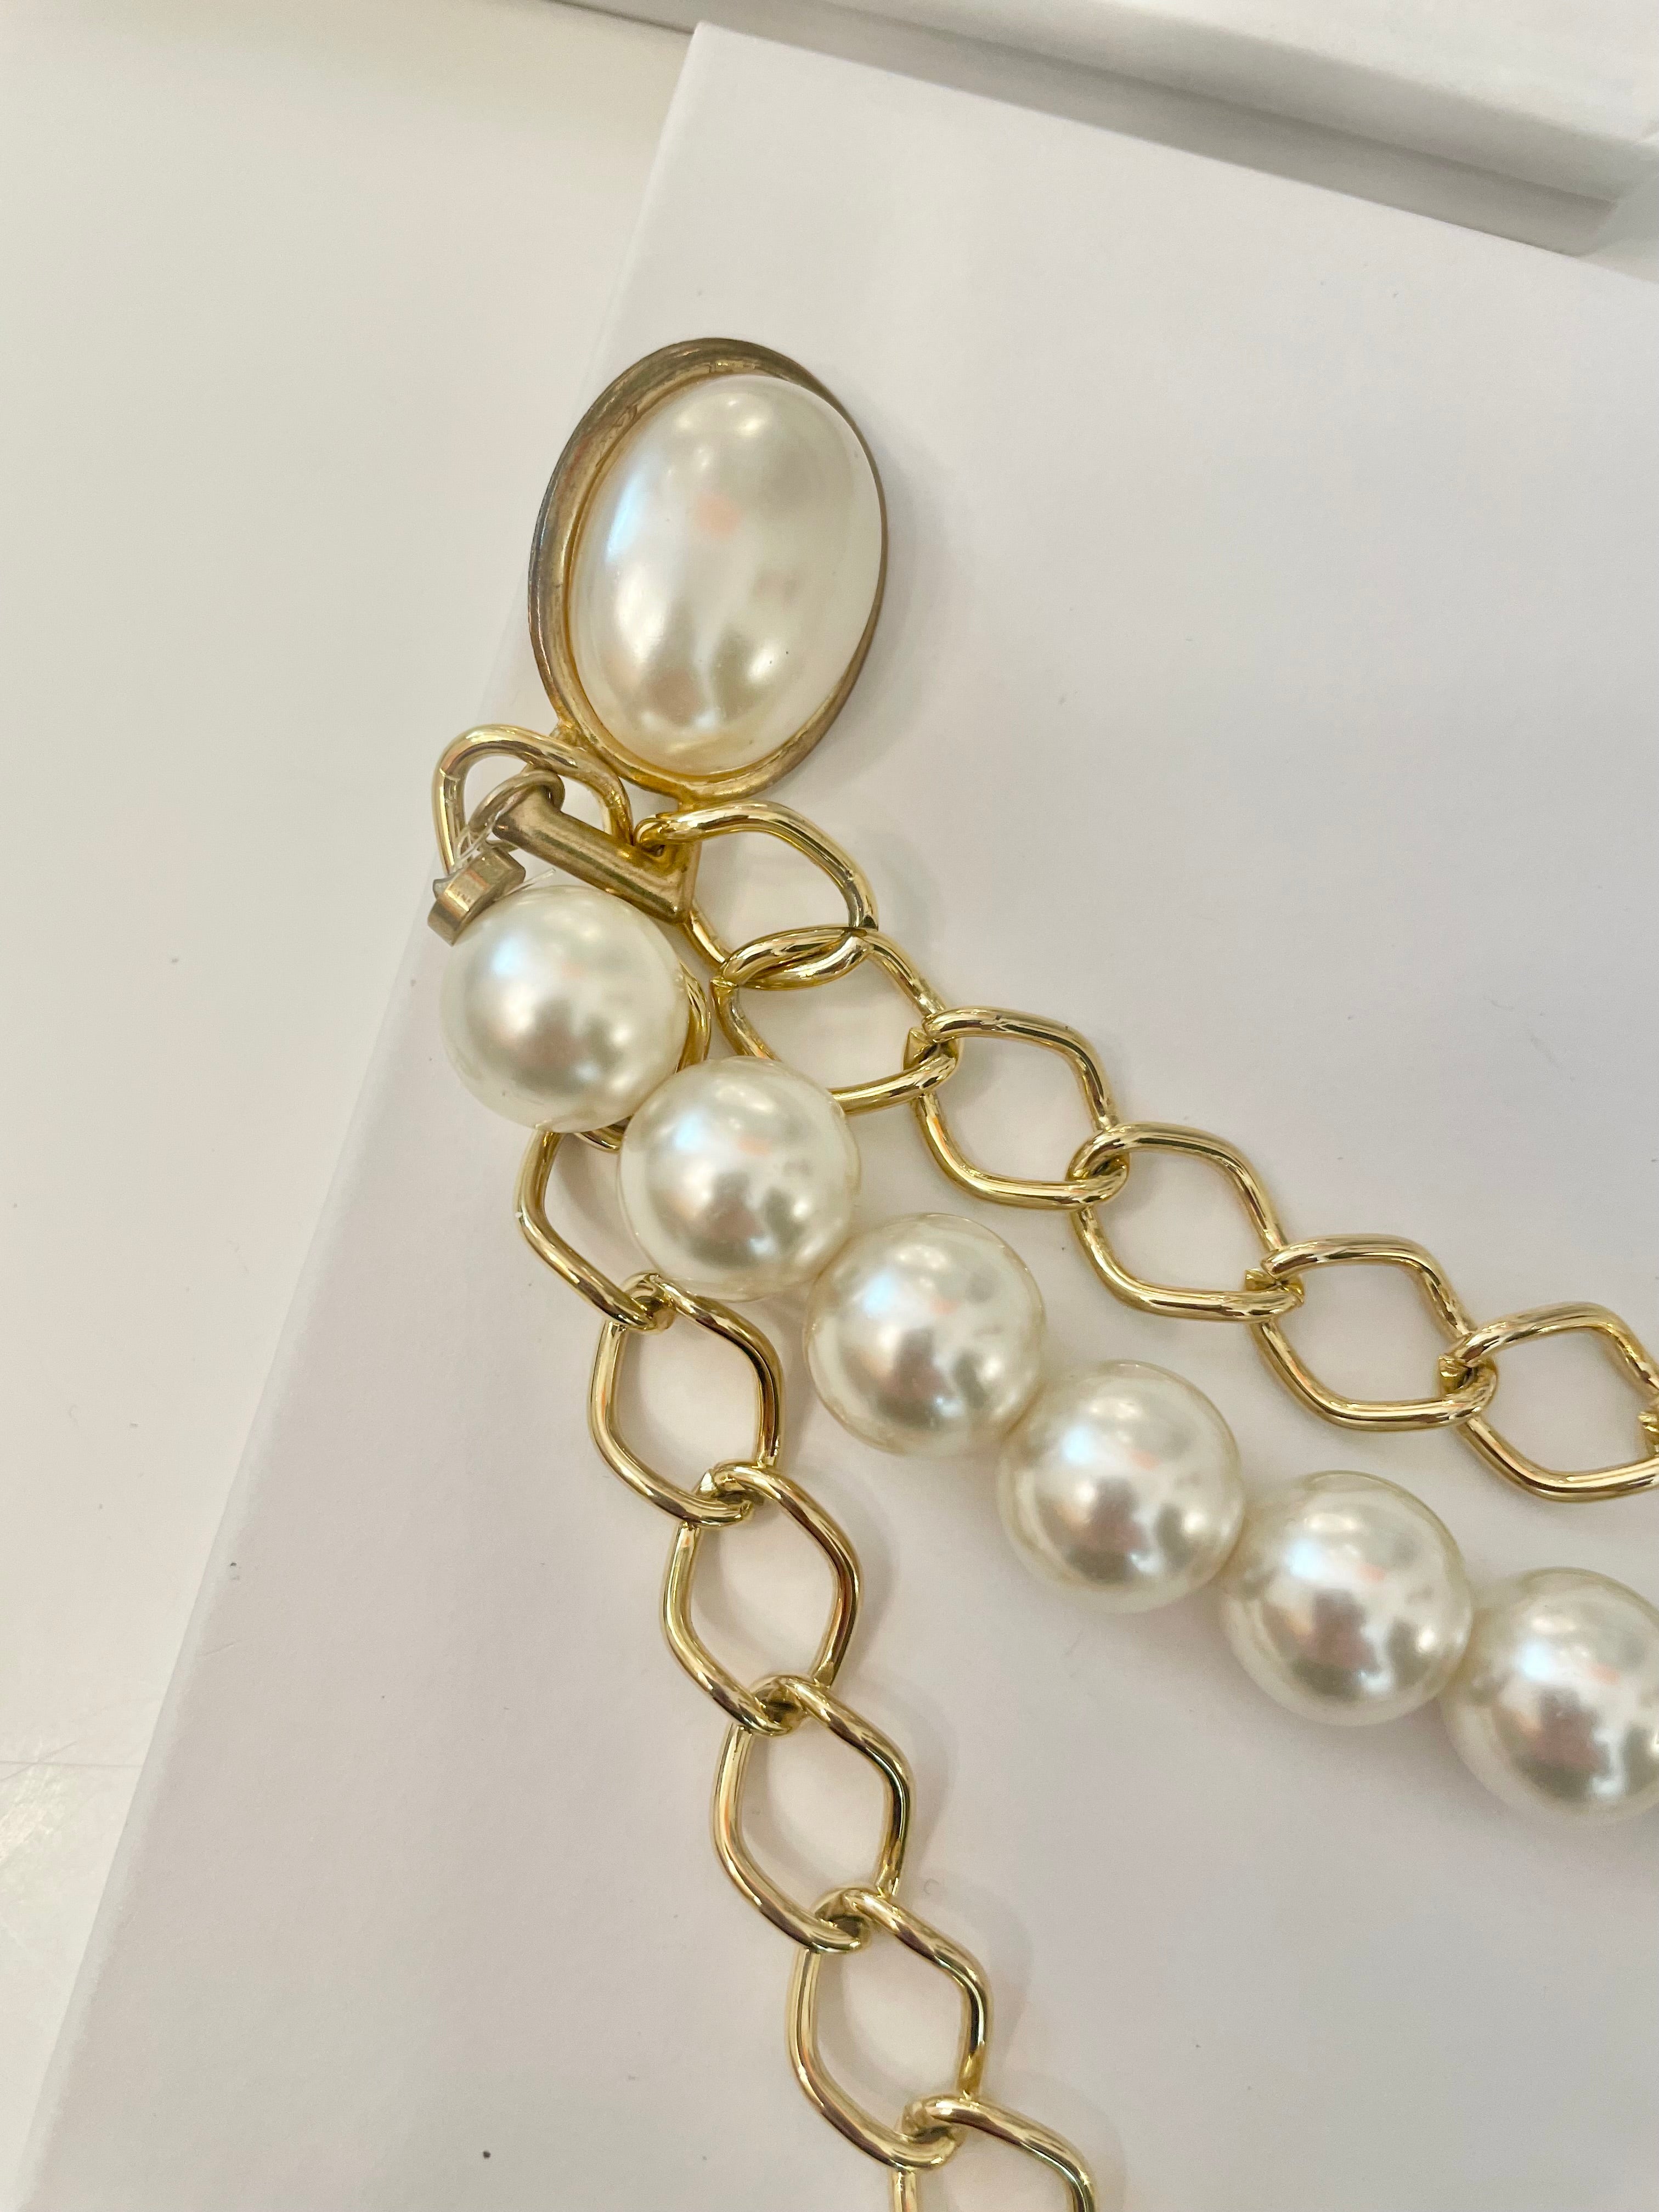 Simply divine pearl, and chain sweater connector. So elegant...